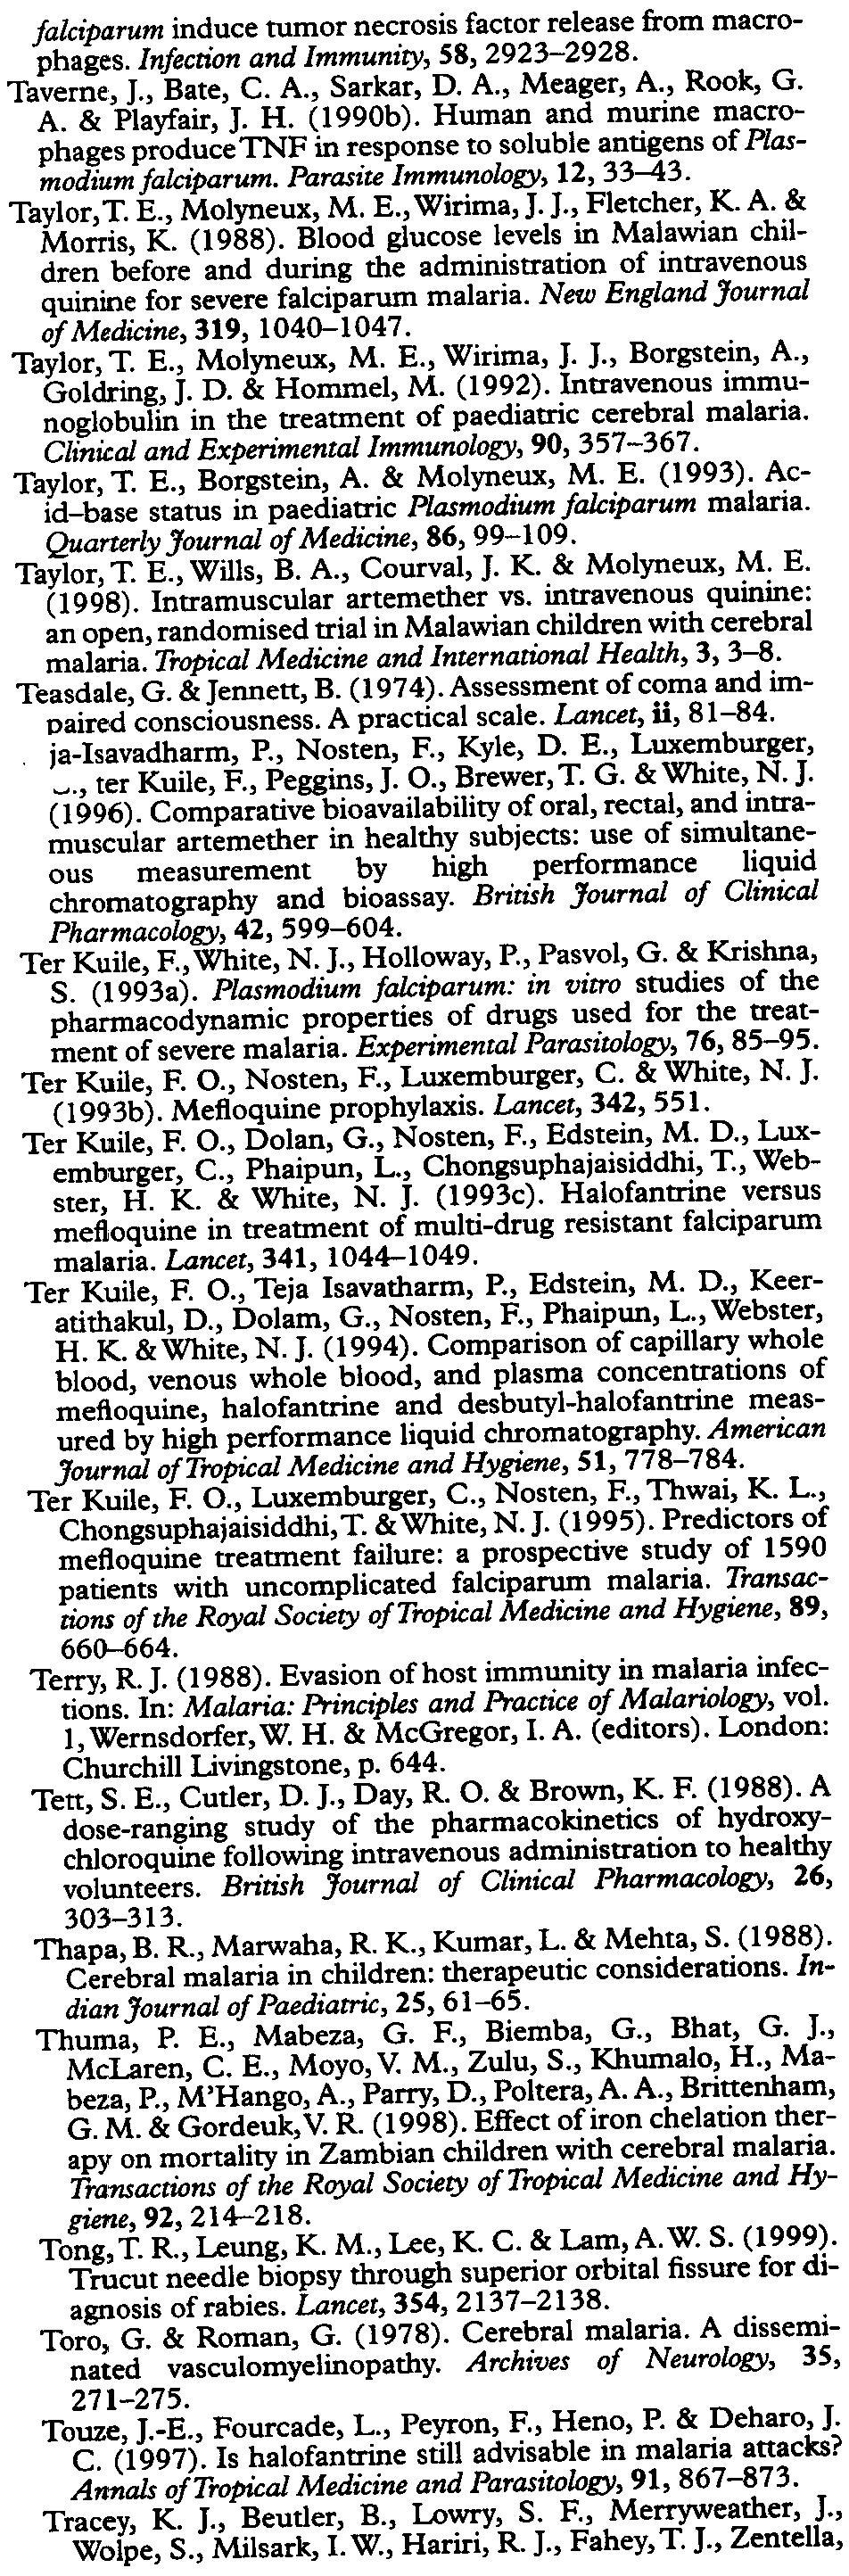 TRANSACTIONS OF THE ROYAL SOCIETY OF TROPICAL MEDICINE AND HYGIENE (2000) 94, SUPPLEMENT Sl/87 Spitz, S. (1946). Pathology of acute falciparum malaria. Military Medicine, 99,555-572. Sprung, C. L.